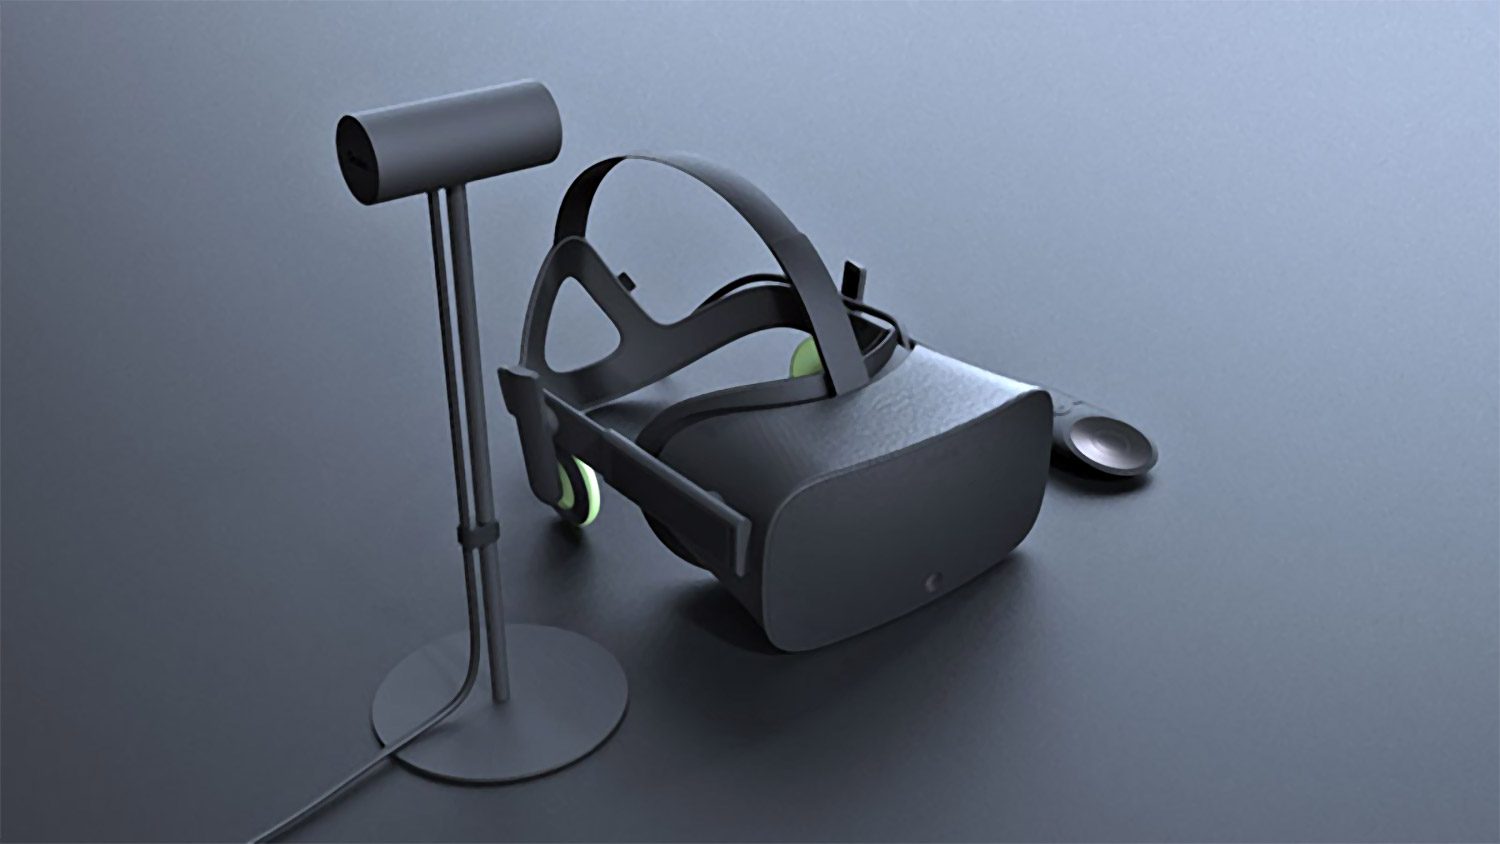 Front-facing Camera and Positional Oculus Rift Shown in Leak Road to VR